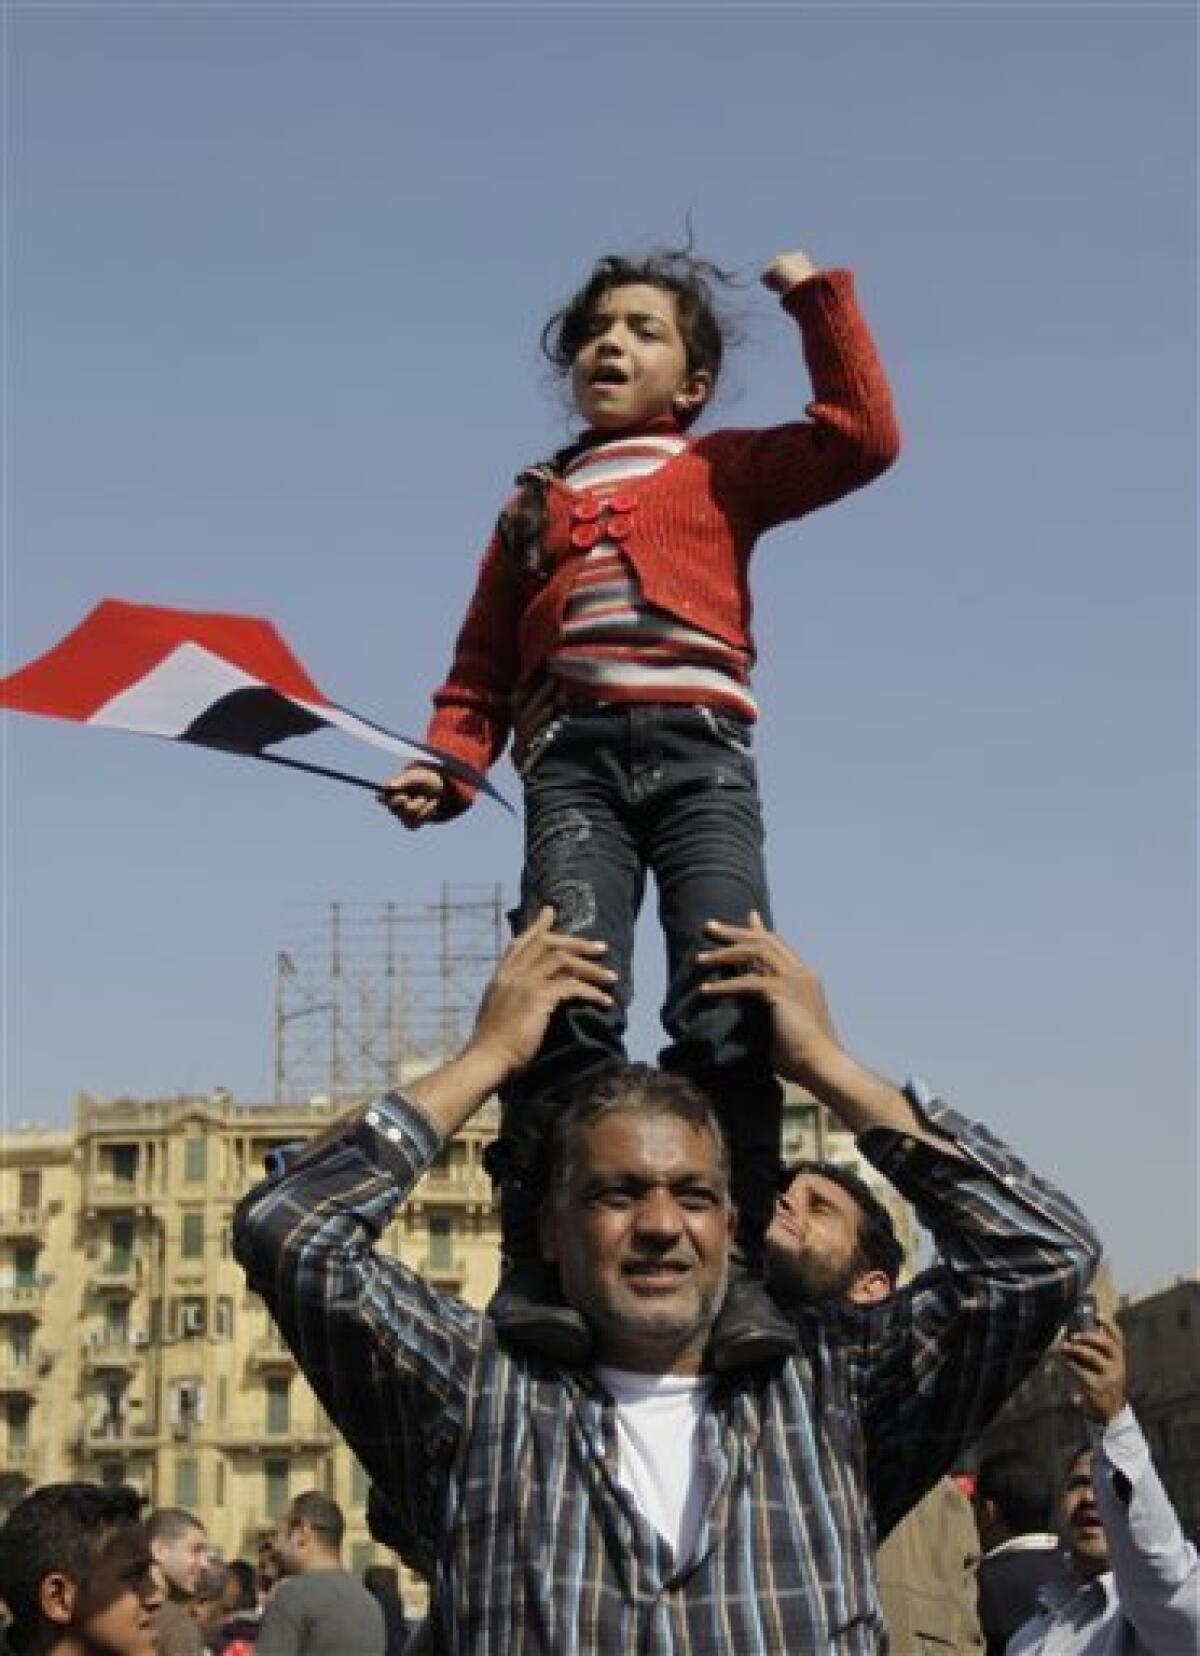 A girl standing on a man's shoulders reacts during a demonstration in Tahrir, or Liberation, Square in Cairo, Egypt, Tuesday, Feb. 1, 2011. More than a quarter-million people flooded into the heart of Cairo Tuesday, filling the city's main square in by far the largest demonstration in a week of unceasing demands for President Hosni Mubarak to leave after nearly 30 years in power. (AP Photo/Ben Curtis)